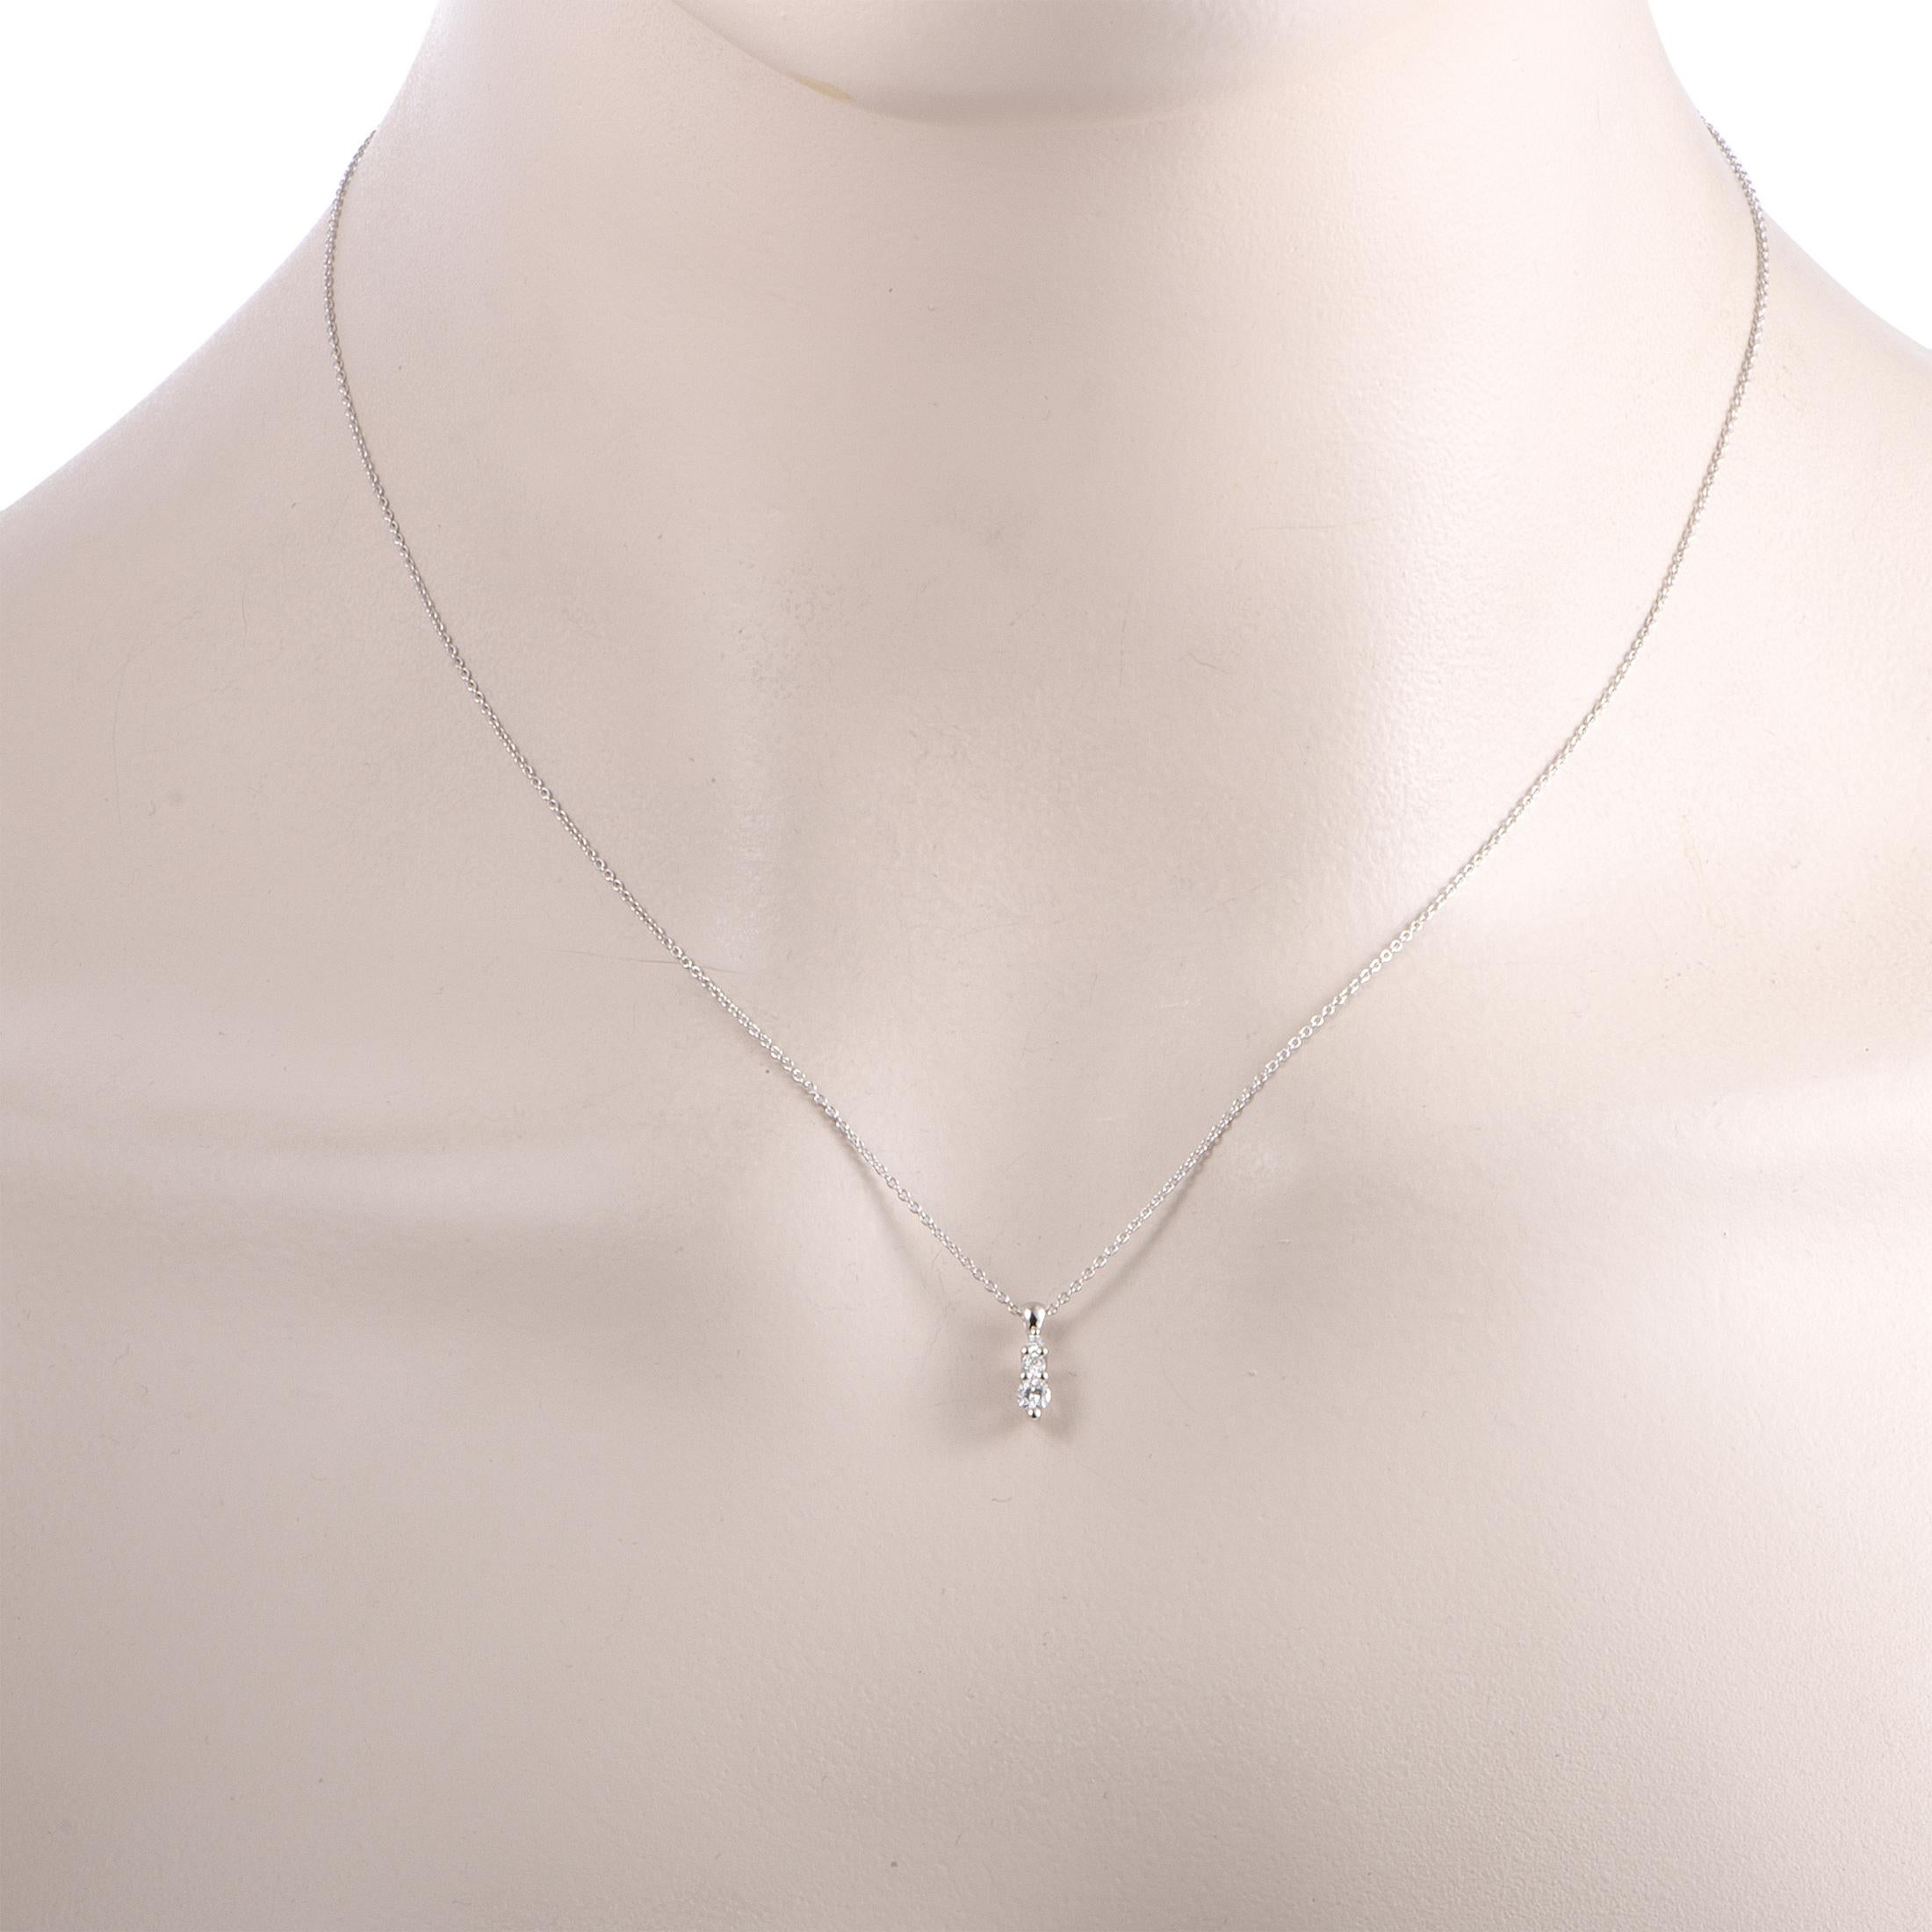 Offering a delightfully feminine appearance of understated elegance, this dainty Bliss necklace will add just the needed amount of alluring diamond brilliance to your look. Made of 18K white gold, the necklace boasts a gorgeous pendant set with 0.15